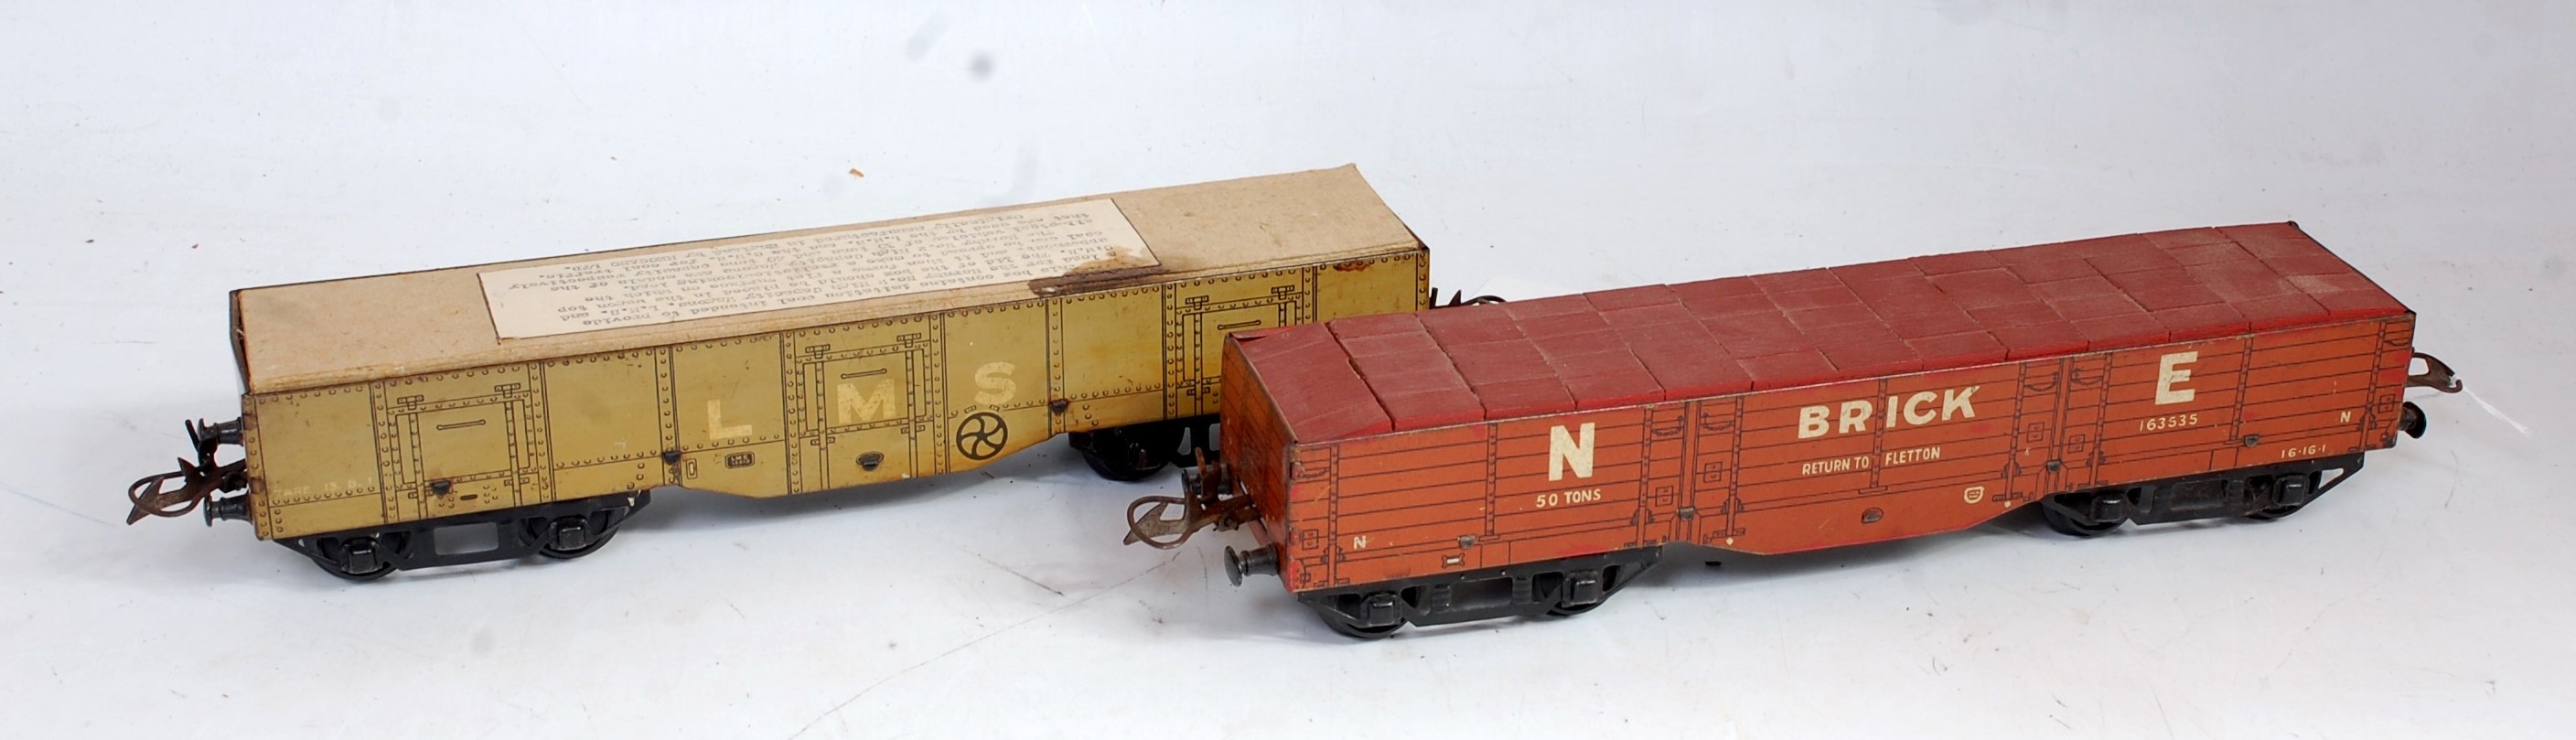 Hornby 1936/41 2x No. 2 High Capacity wagons including NE brick with dummy load and a LMS coal